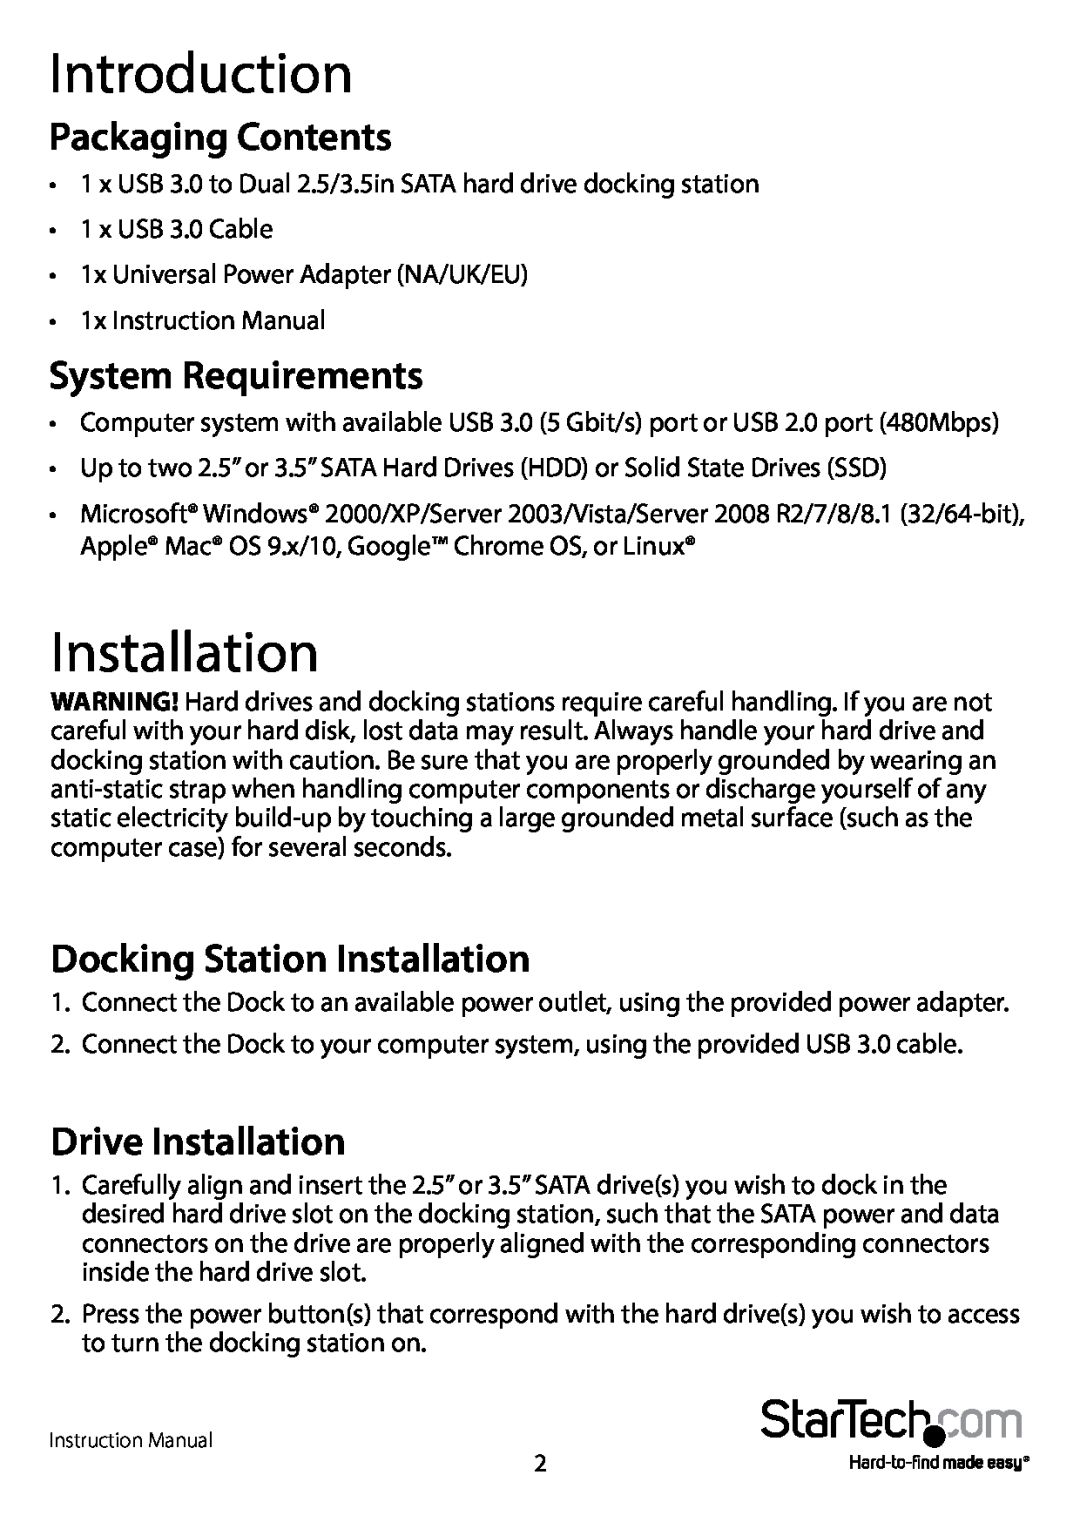 StarTech.com usb 3.0 to dual 2.5/3.5in sata hdd dock with uasp manual Introduction, Installation, Packaging Contents 